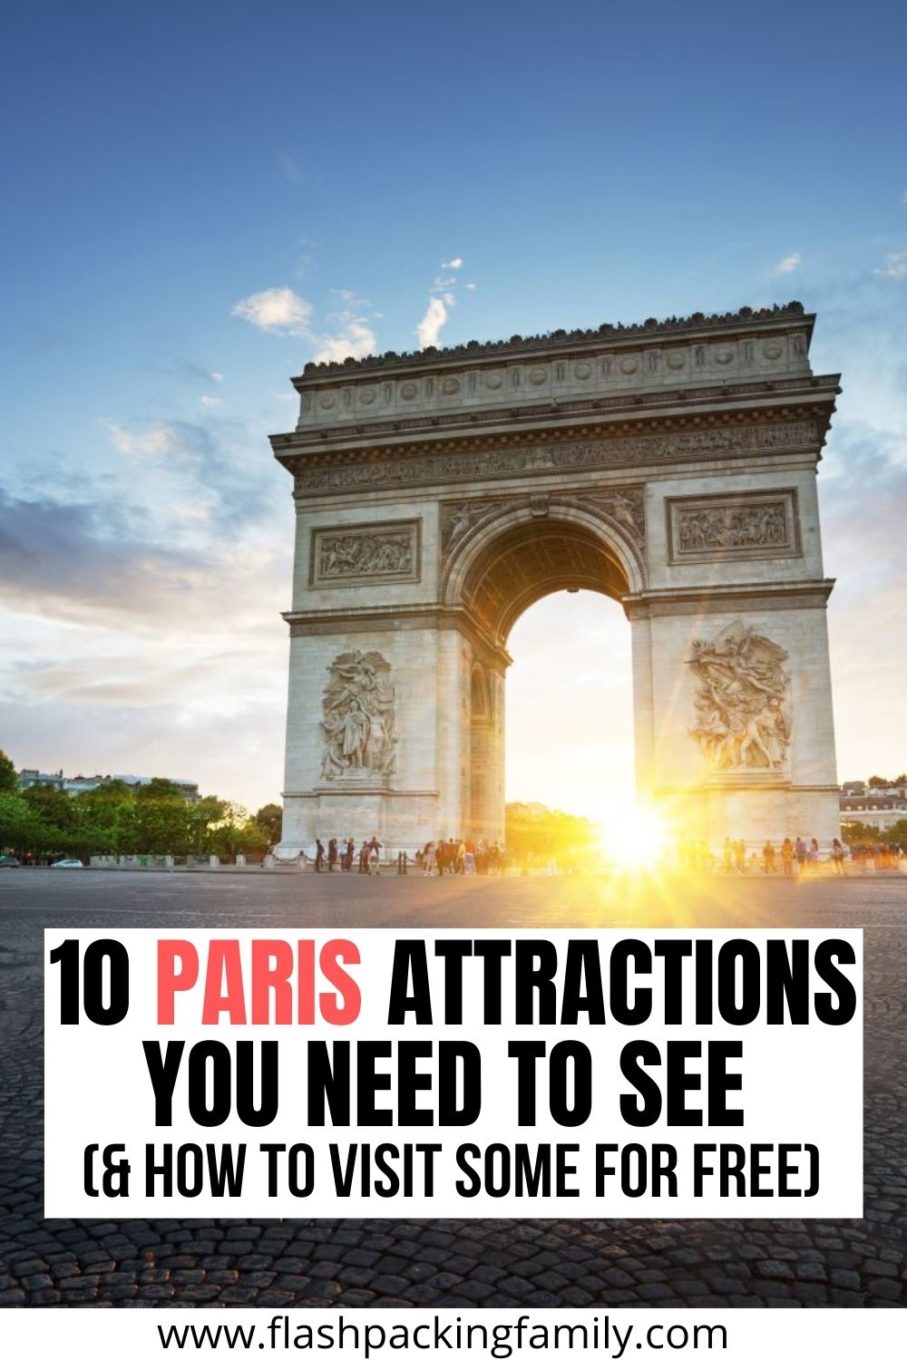 10 Paris Attractions You Need To See (& How to visit some for free).